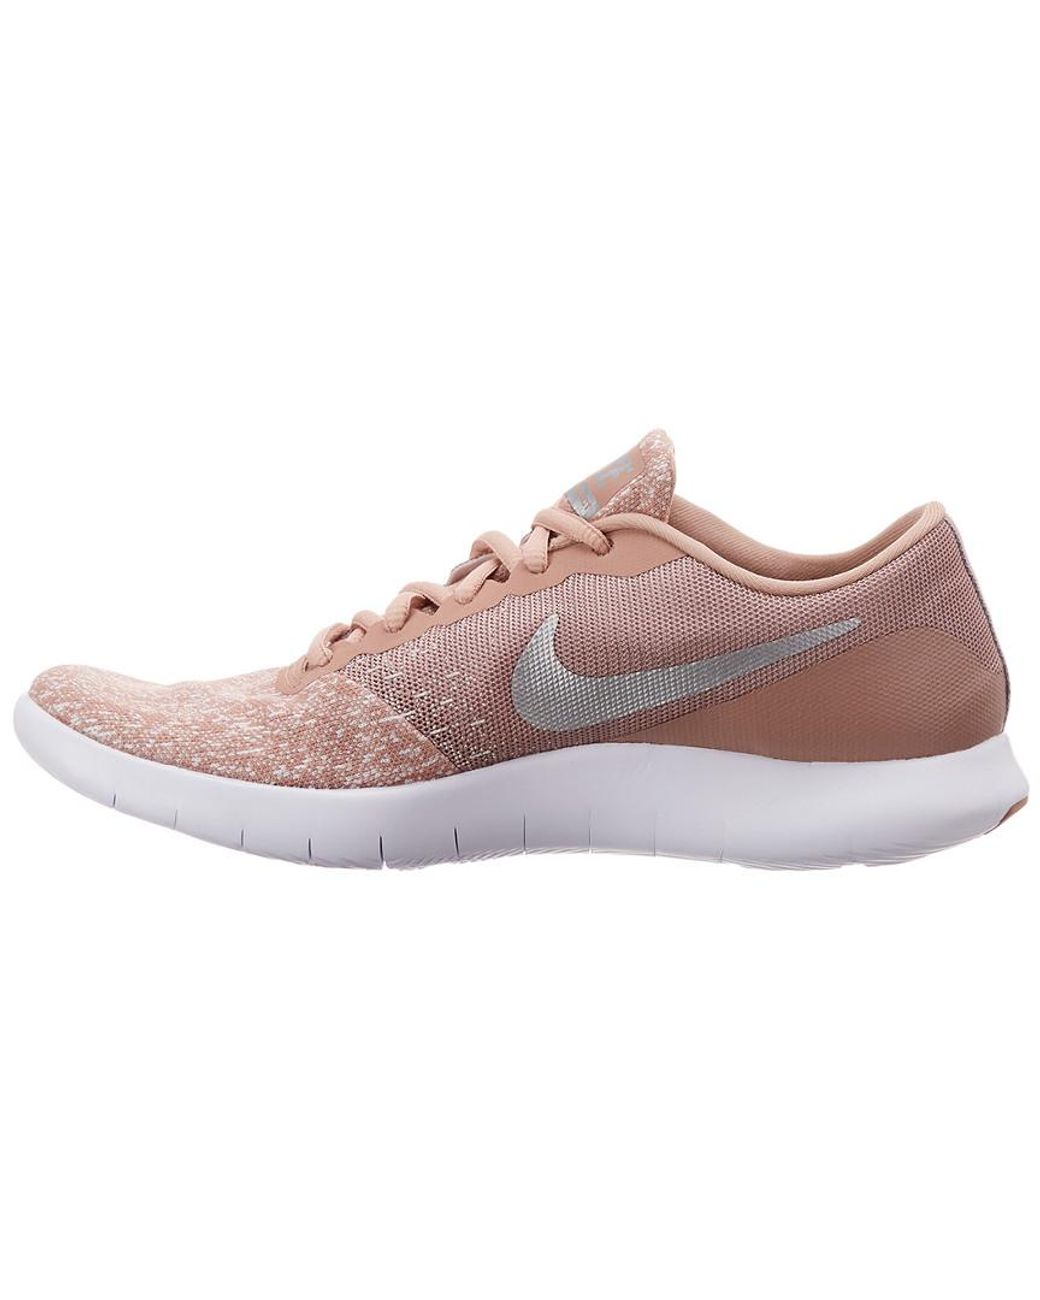 Nike Synthetic Flex Contact Running Shoe in Pink | Lyst Australia